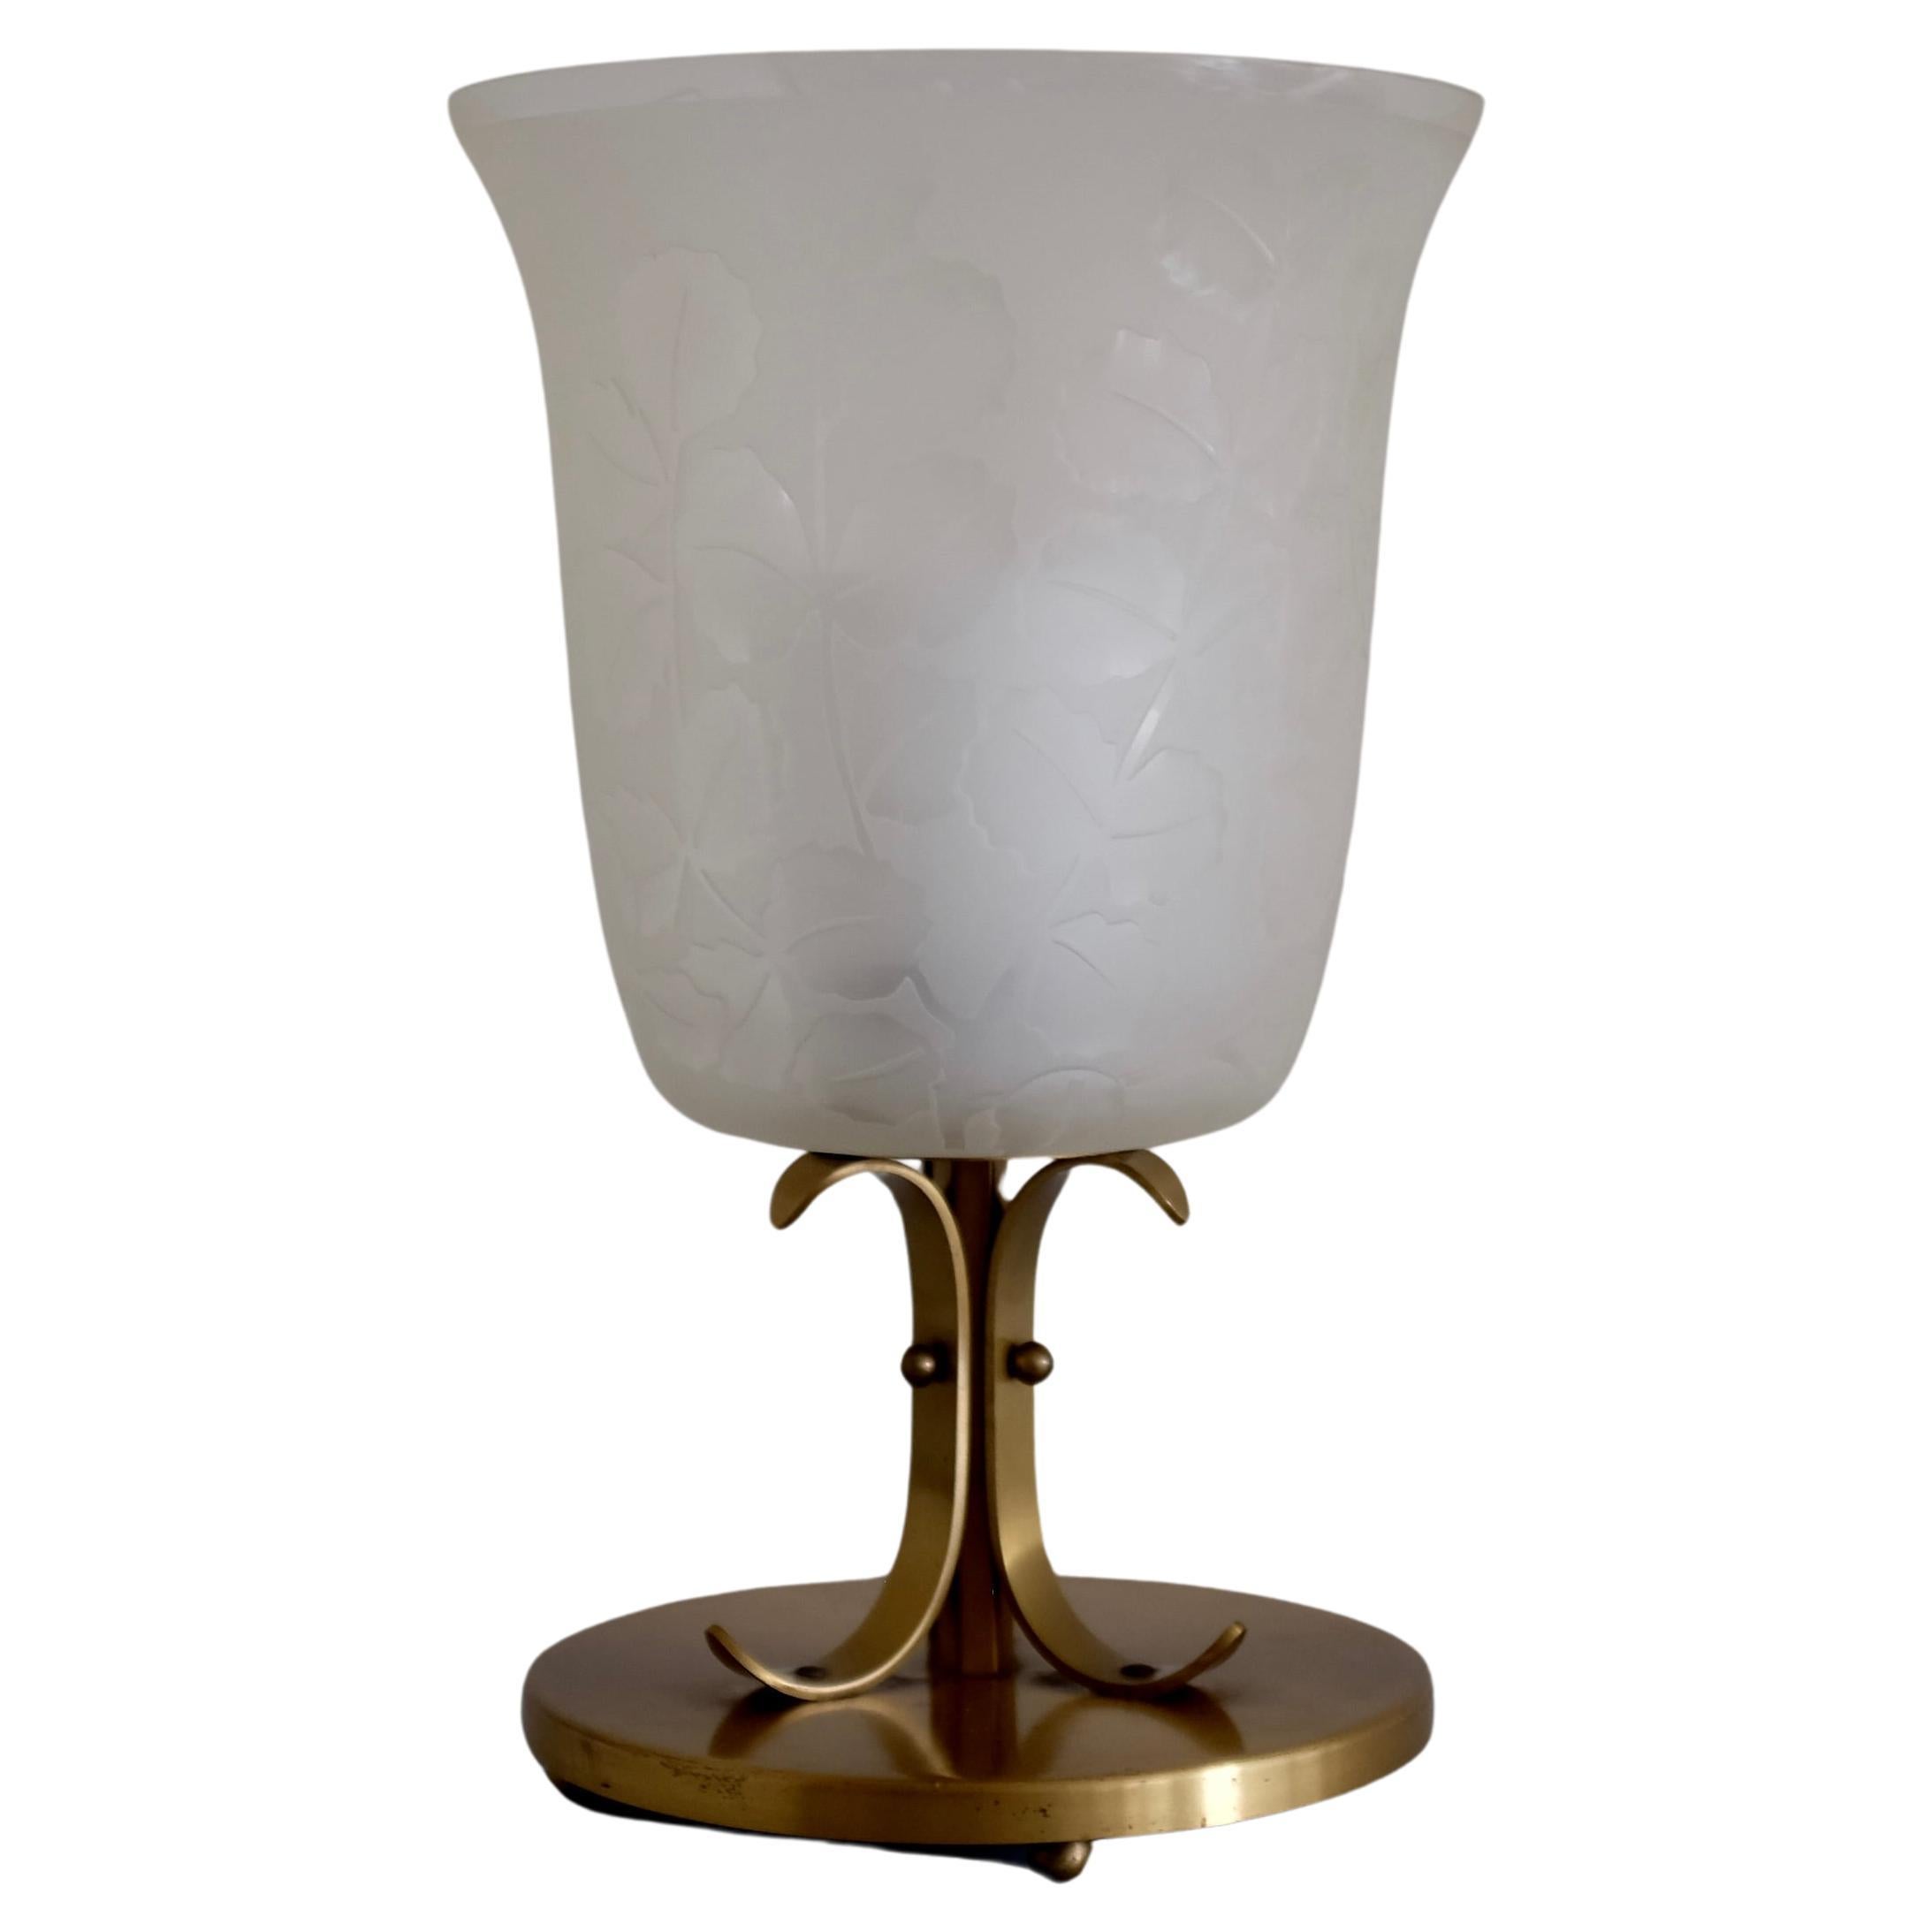 1940s Table lamp by Glössner